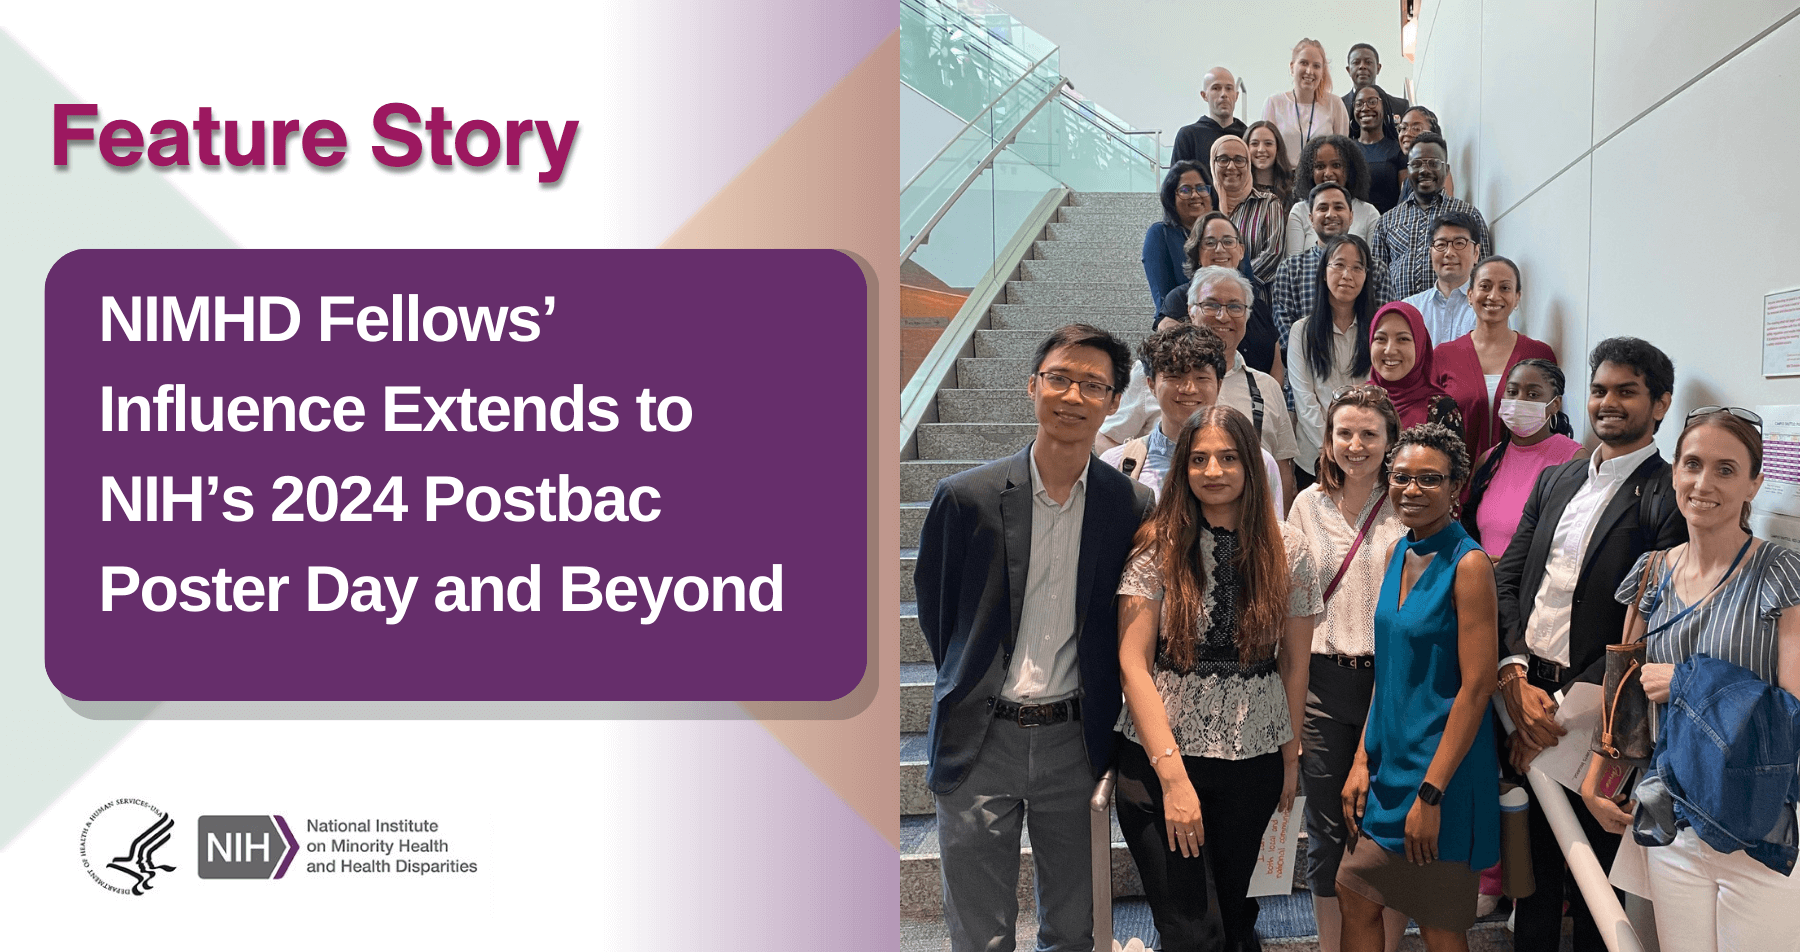 NIMHD Fellows’ Influence Extends to NIH’s 2024 Postbac Poster Day and Beyond. Photo: NIMHD’s 2024 postbacs stand with their mentors on a staircase